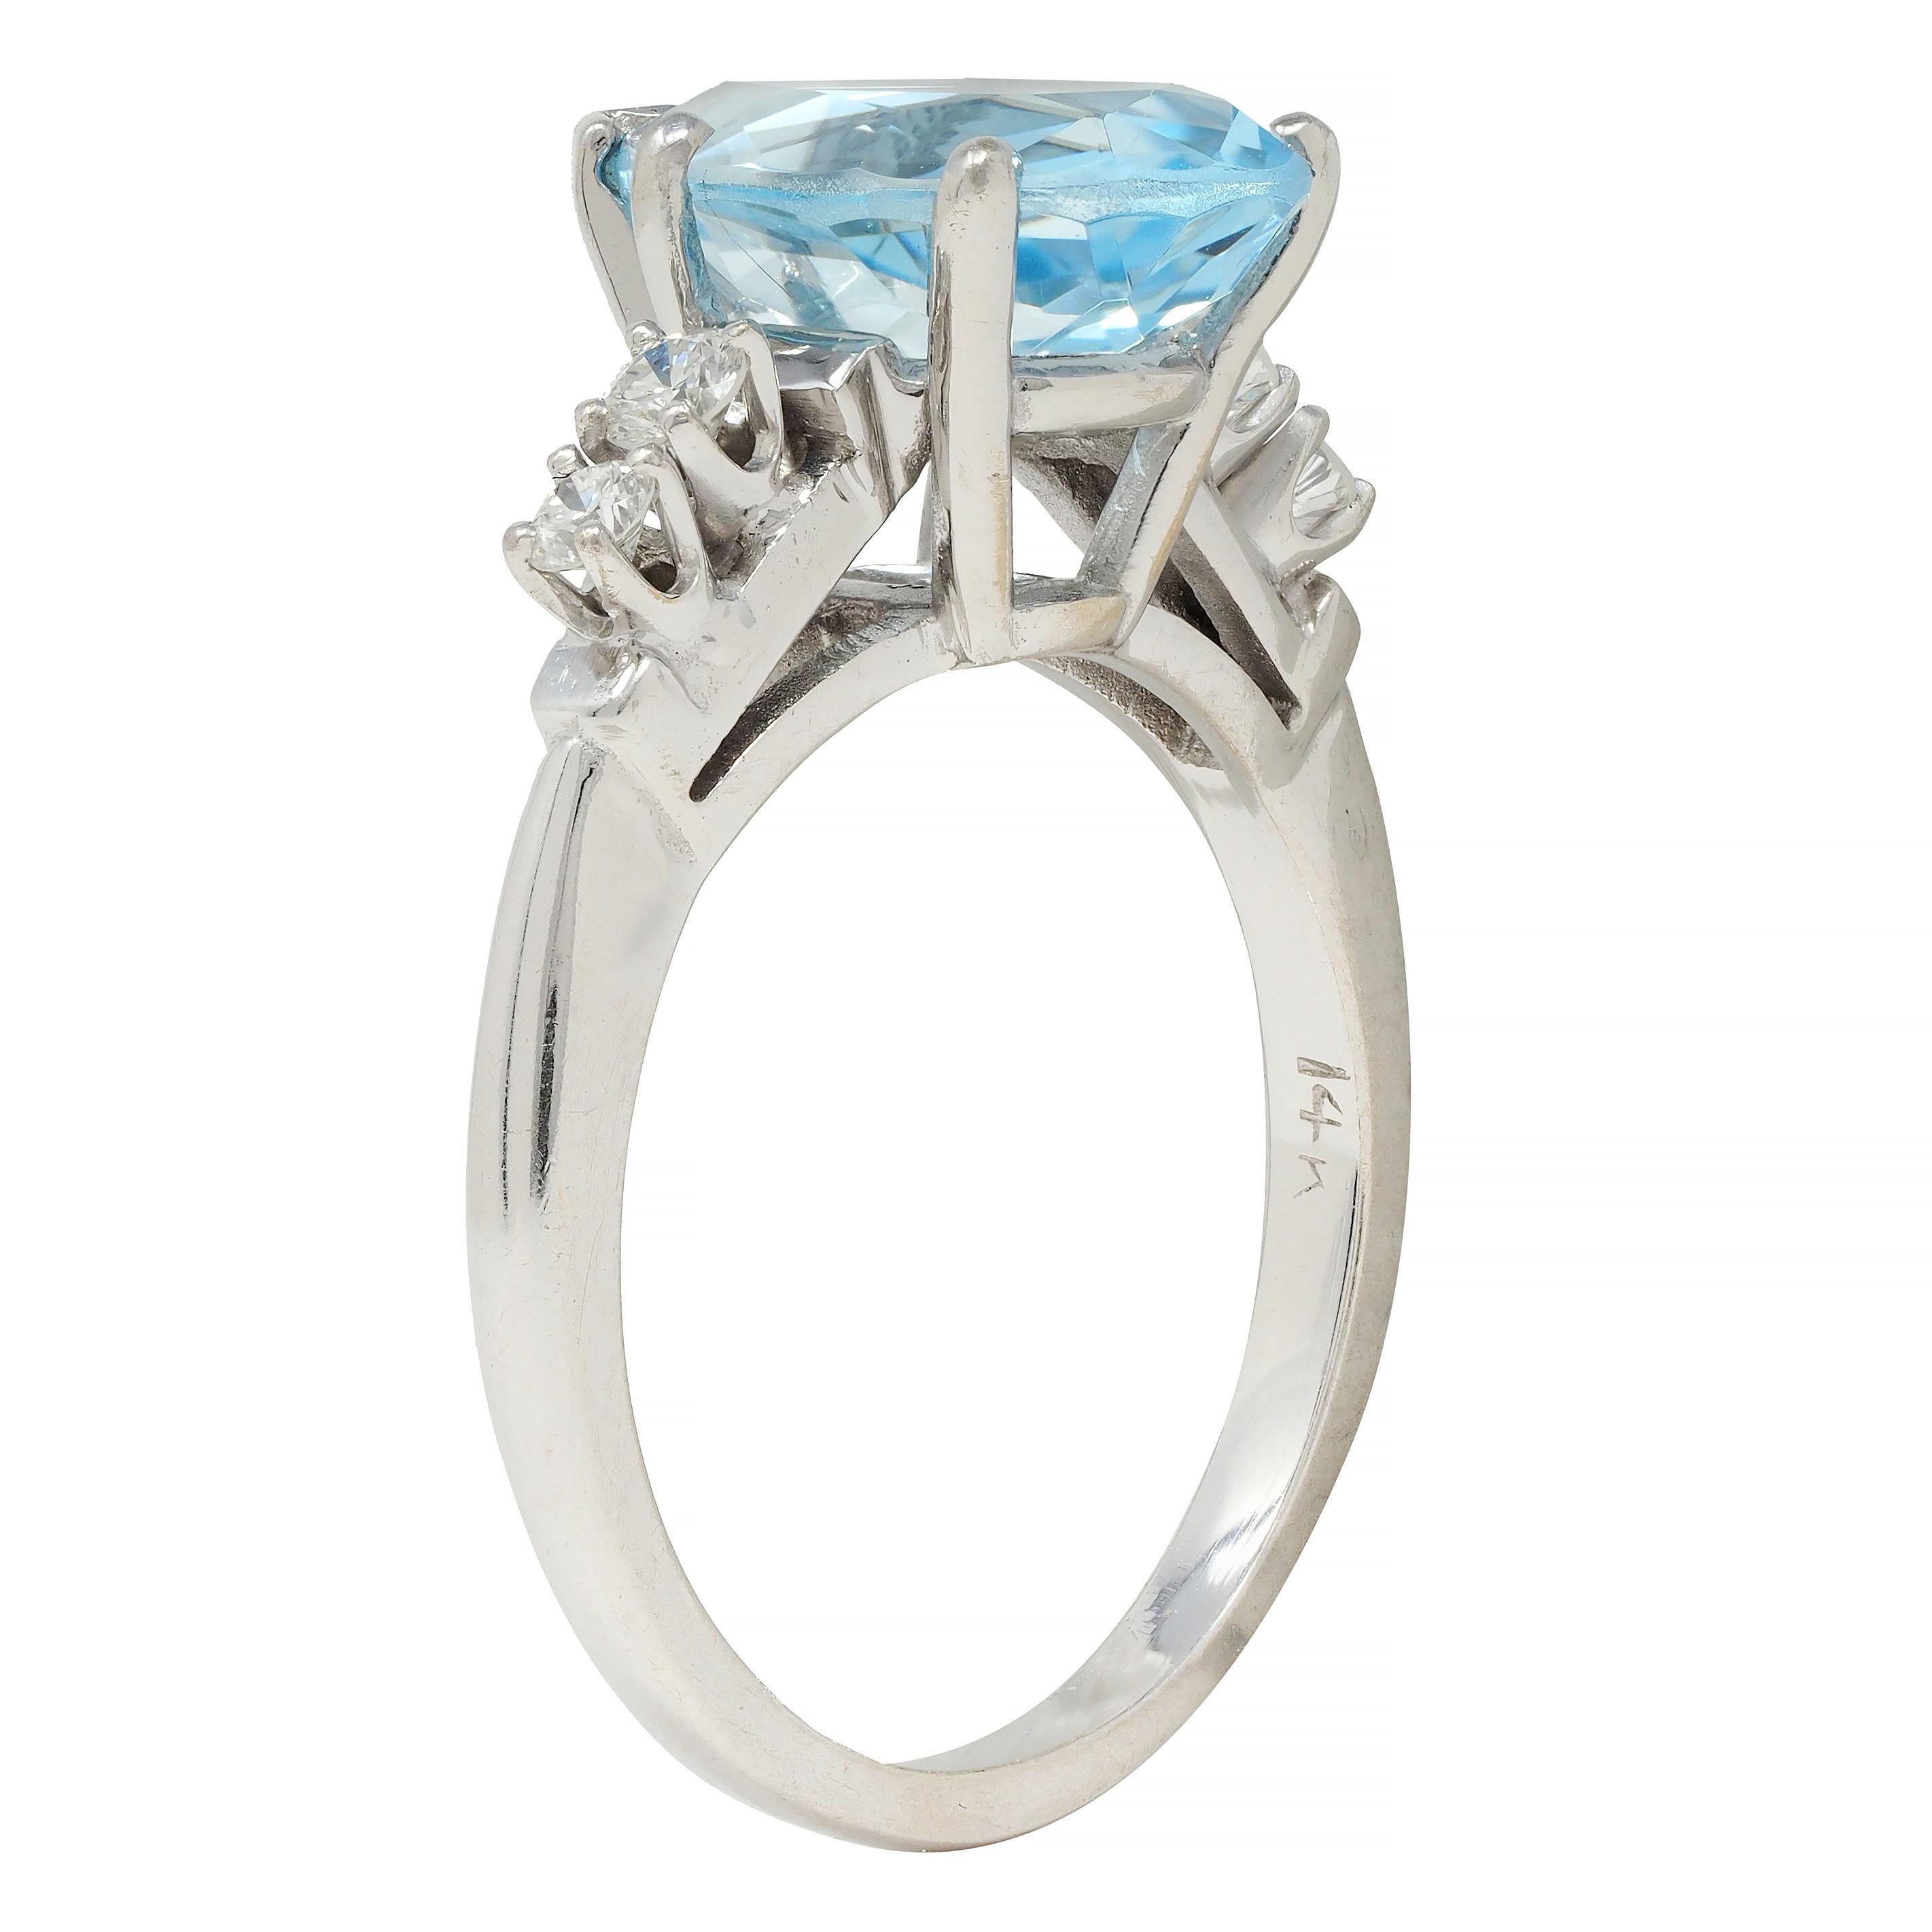 Centering a pear cut aquamarine weighing approximately 2.06 carats - transparent light blue in color 
Prong set in a wire basket and flanked by round brilliant cut diamonds 
Weighing approximately 0.18 carat total - eye clean and bright
Prong set in